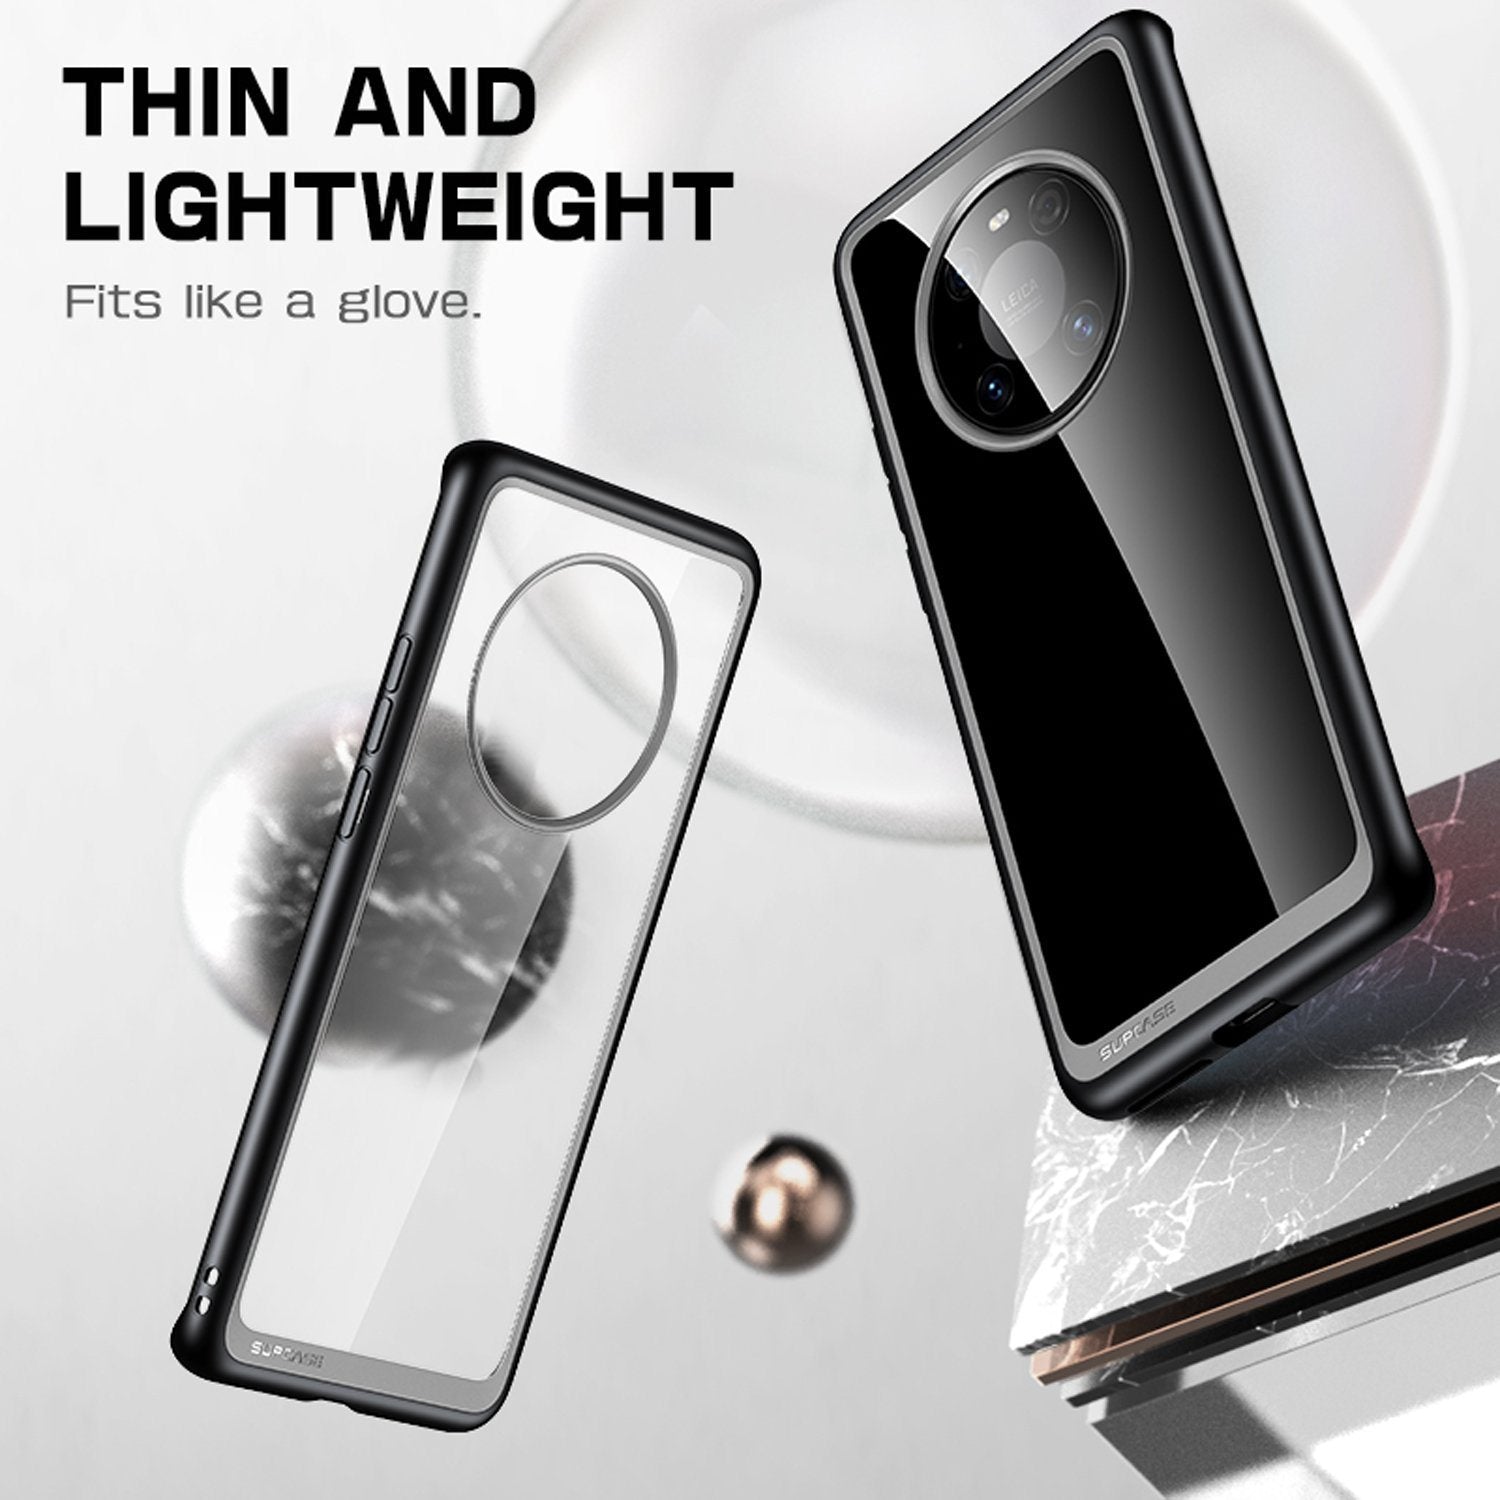 Supcase UB Style Series Hybrid Protective Clear Case for Huawei Mate 40 Pro, Black Mate 40 Pro Supcase 